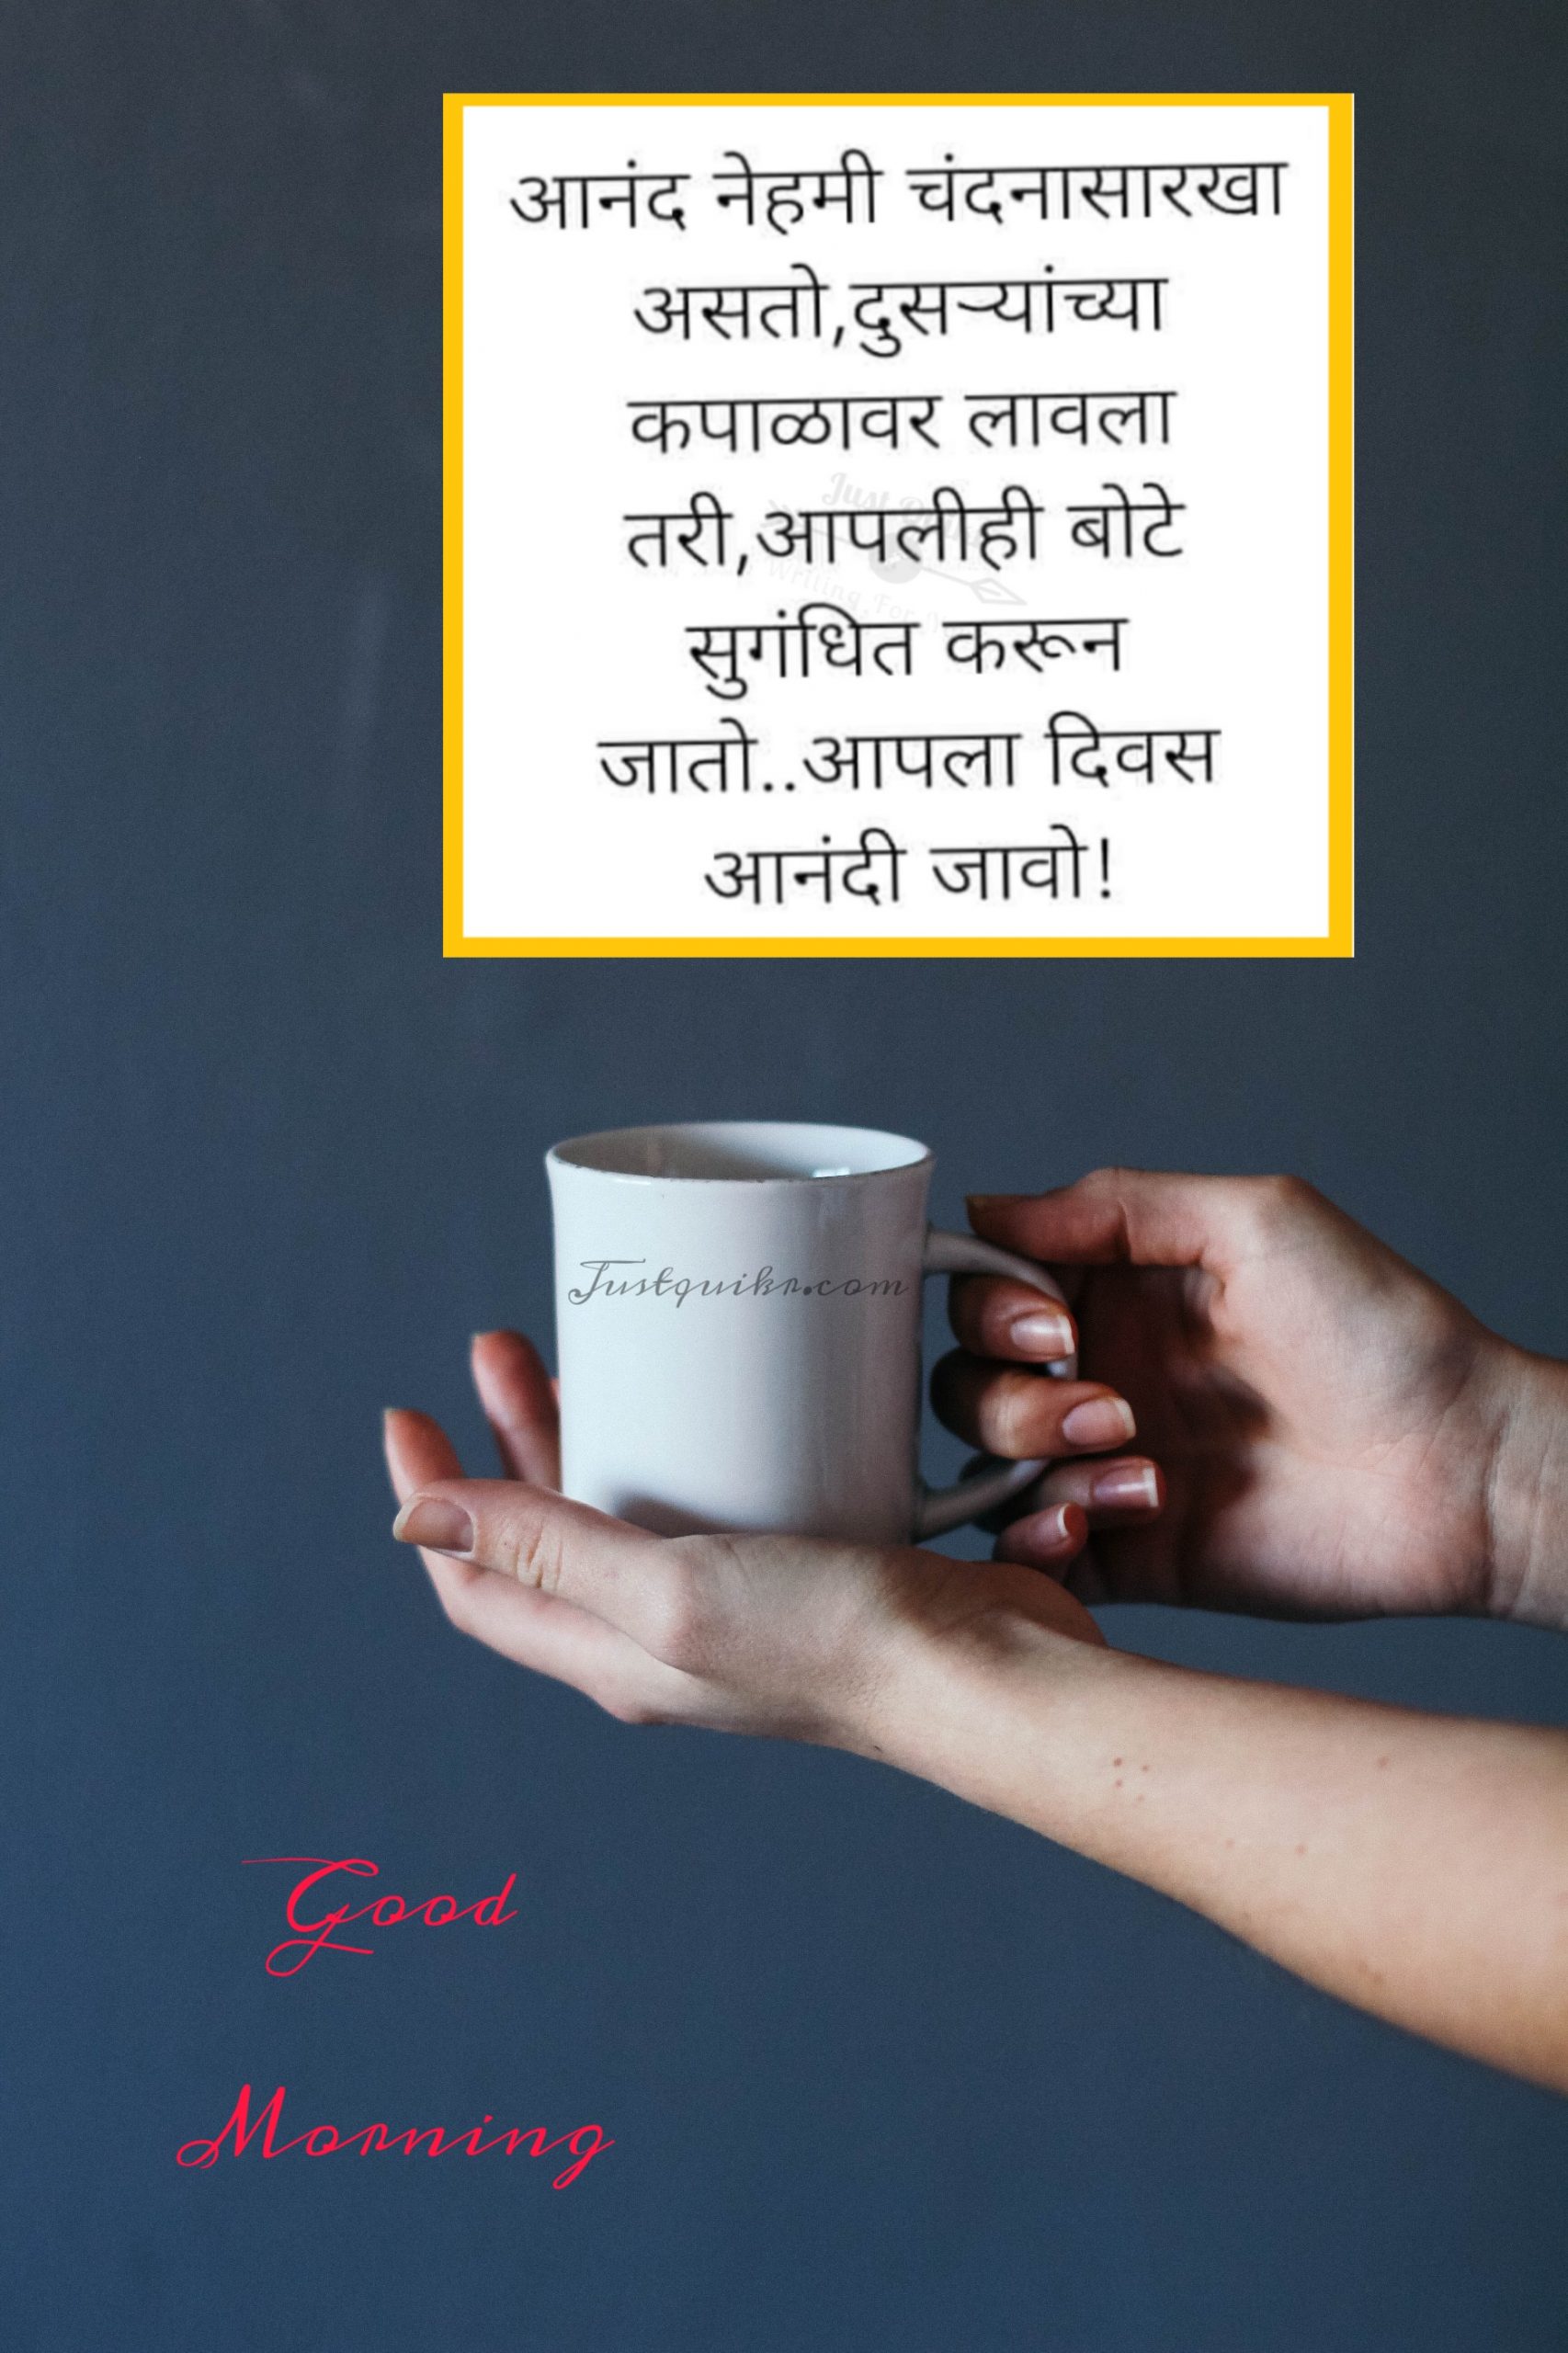 Good Morning Quotes in Marathi Pics Images